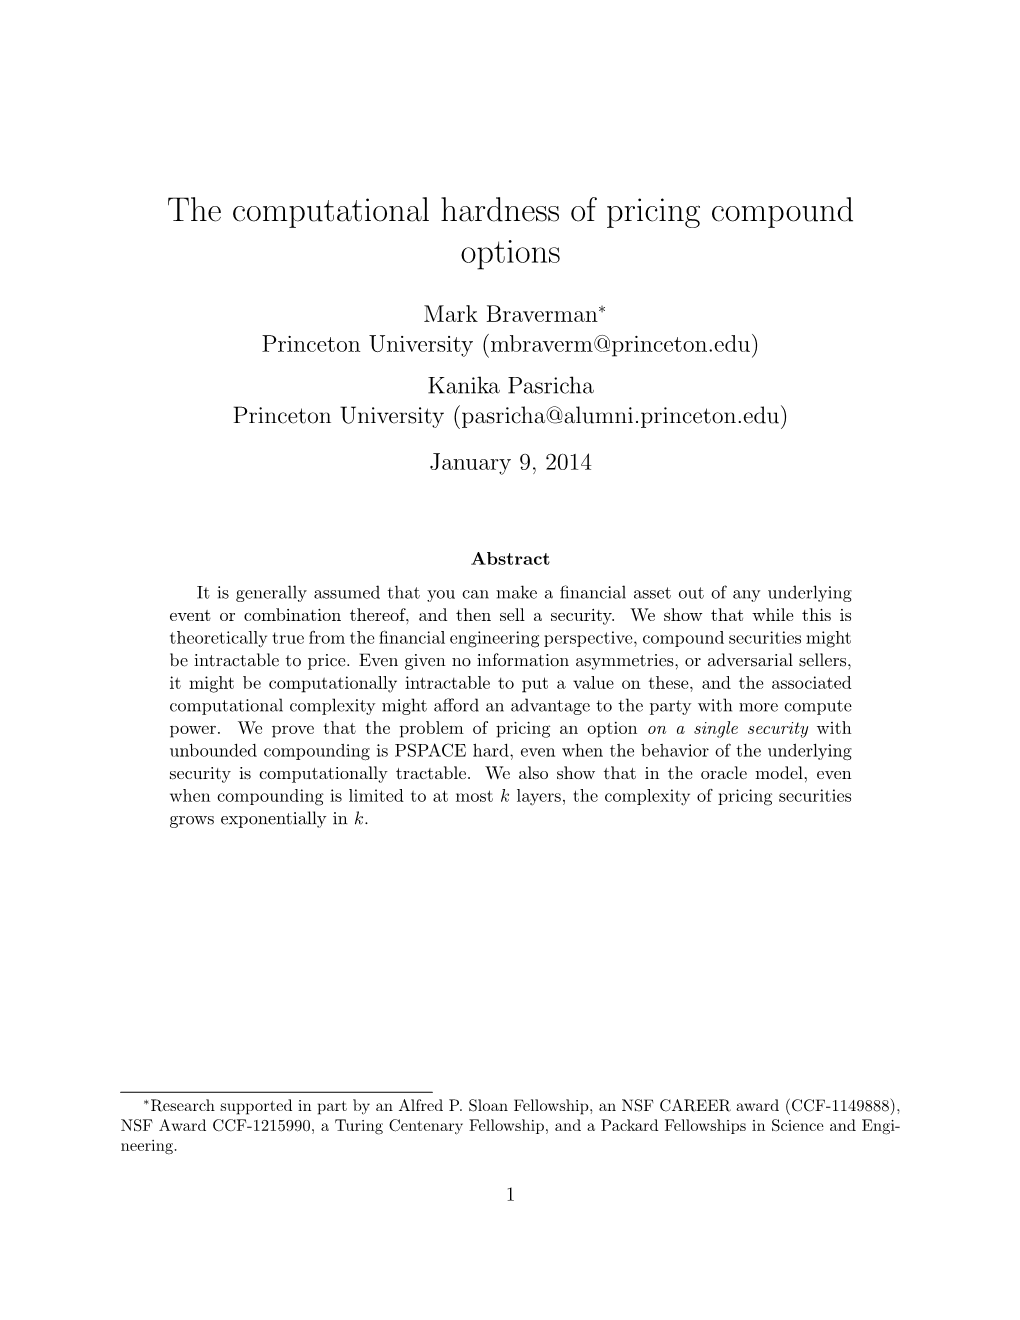 The Computational Hardness of Pricing Compound Options